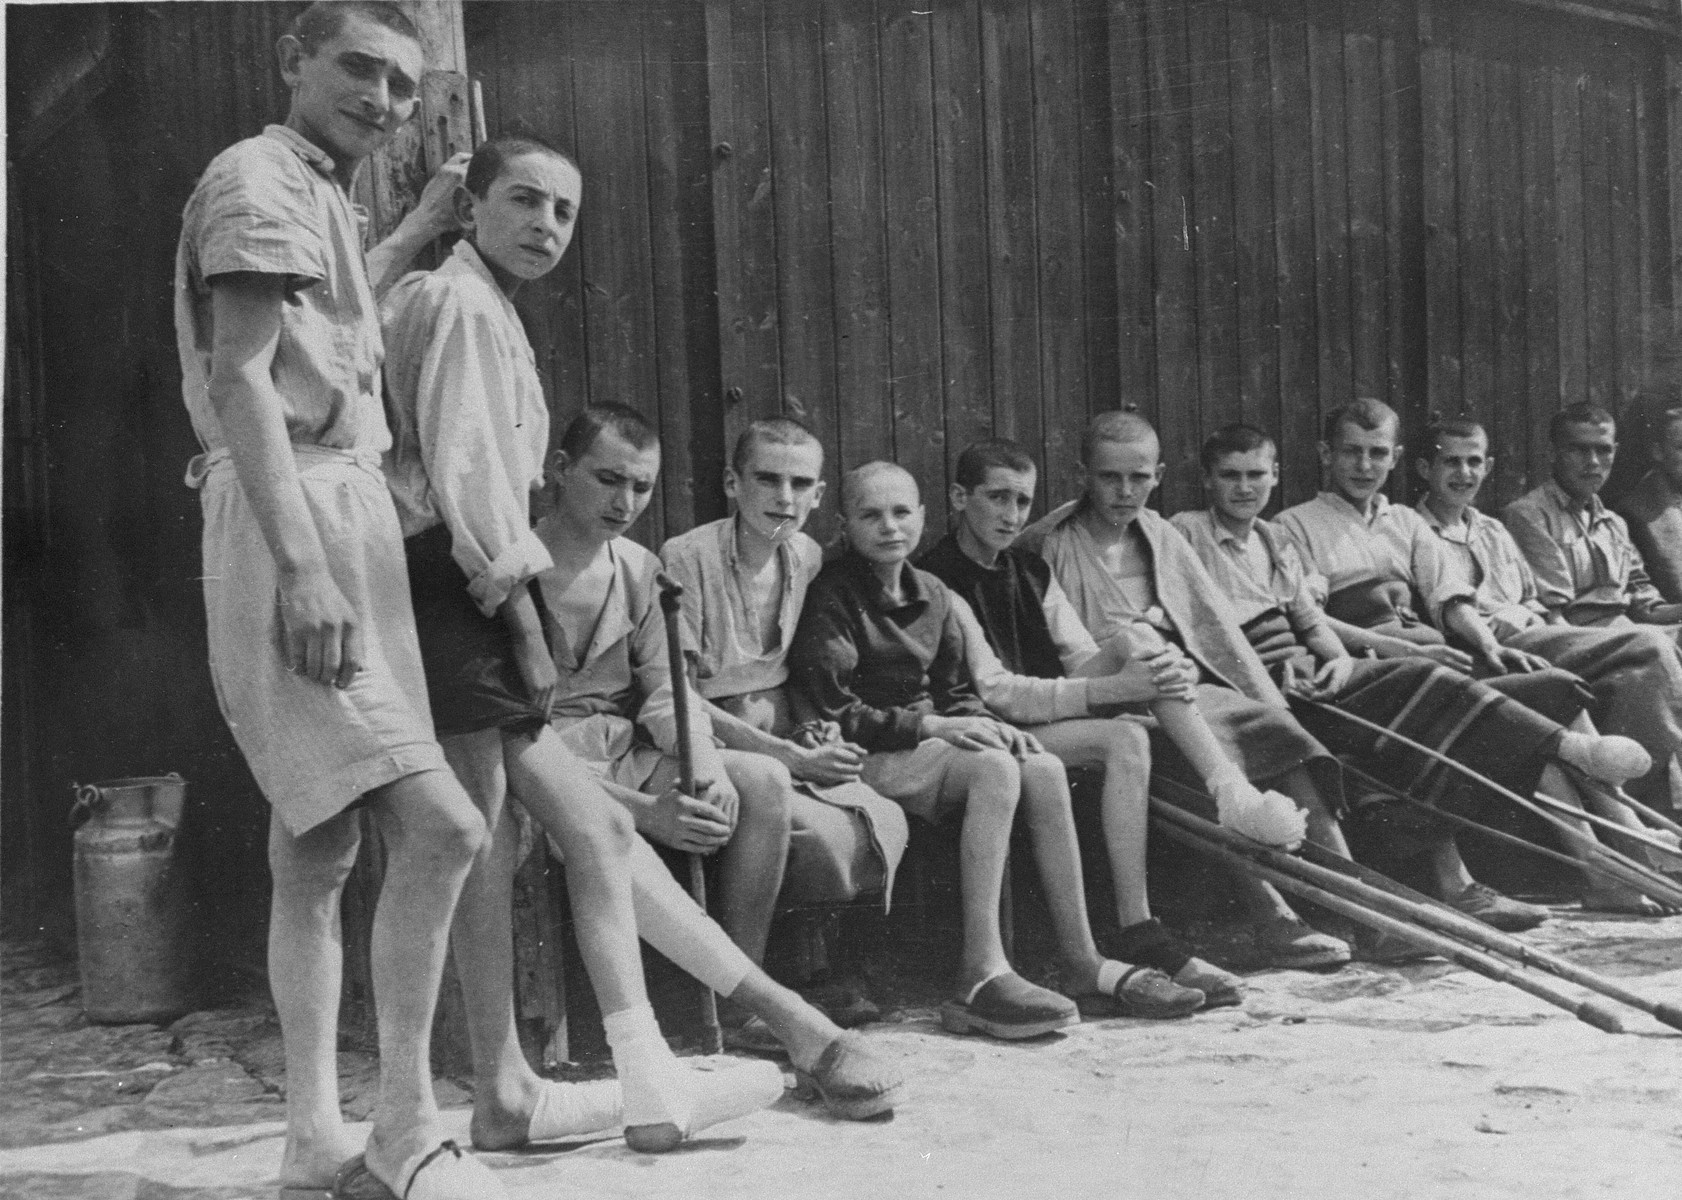 Young crippled survivors in Buchenwald after liberation. 

Rene Edgar Tressler is sixth from the left.